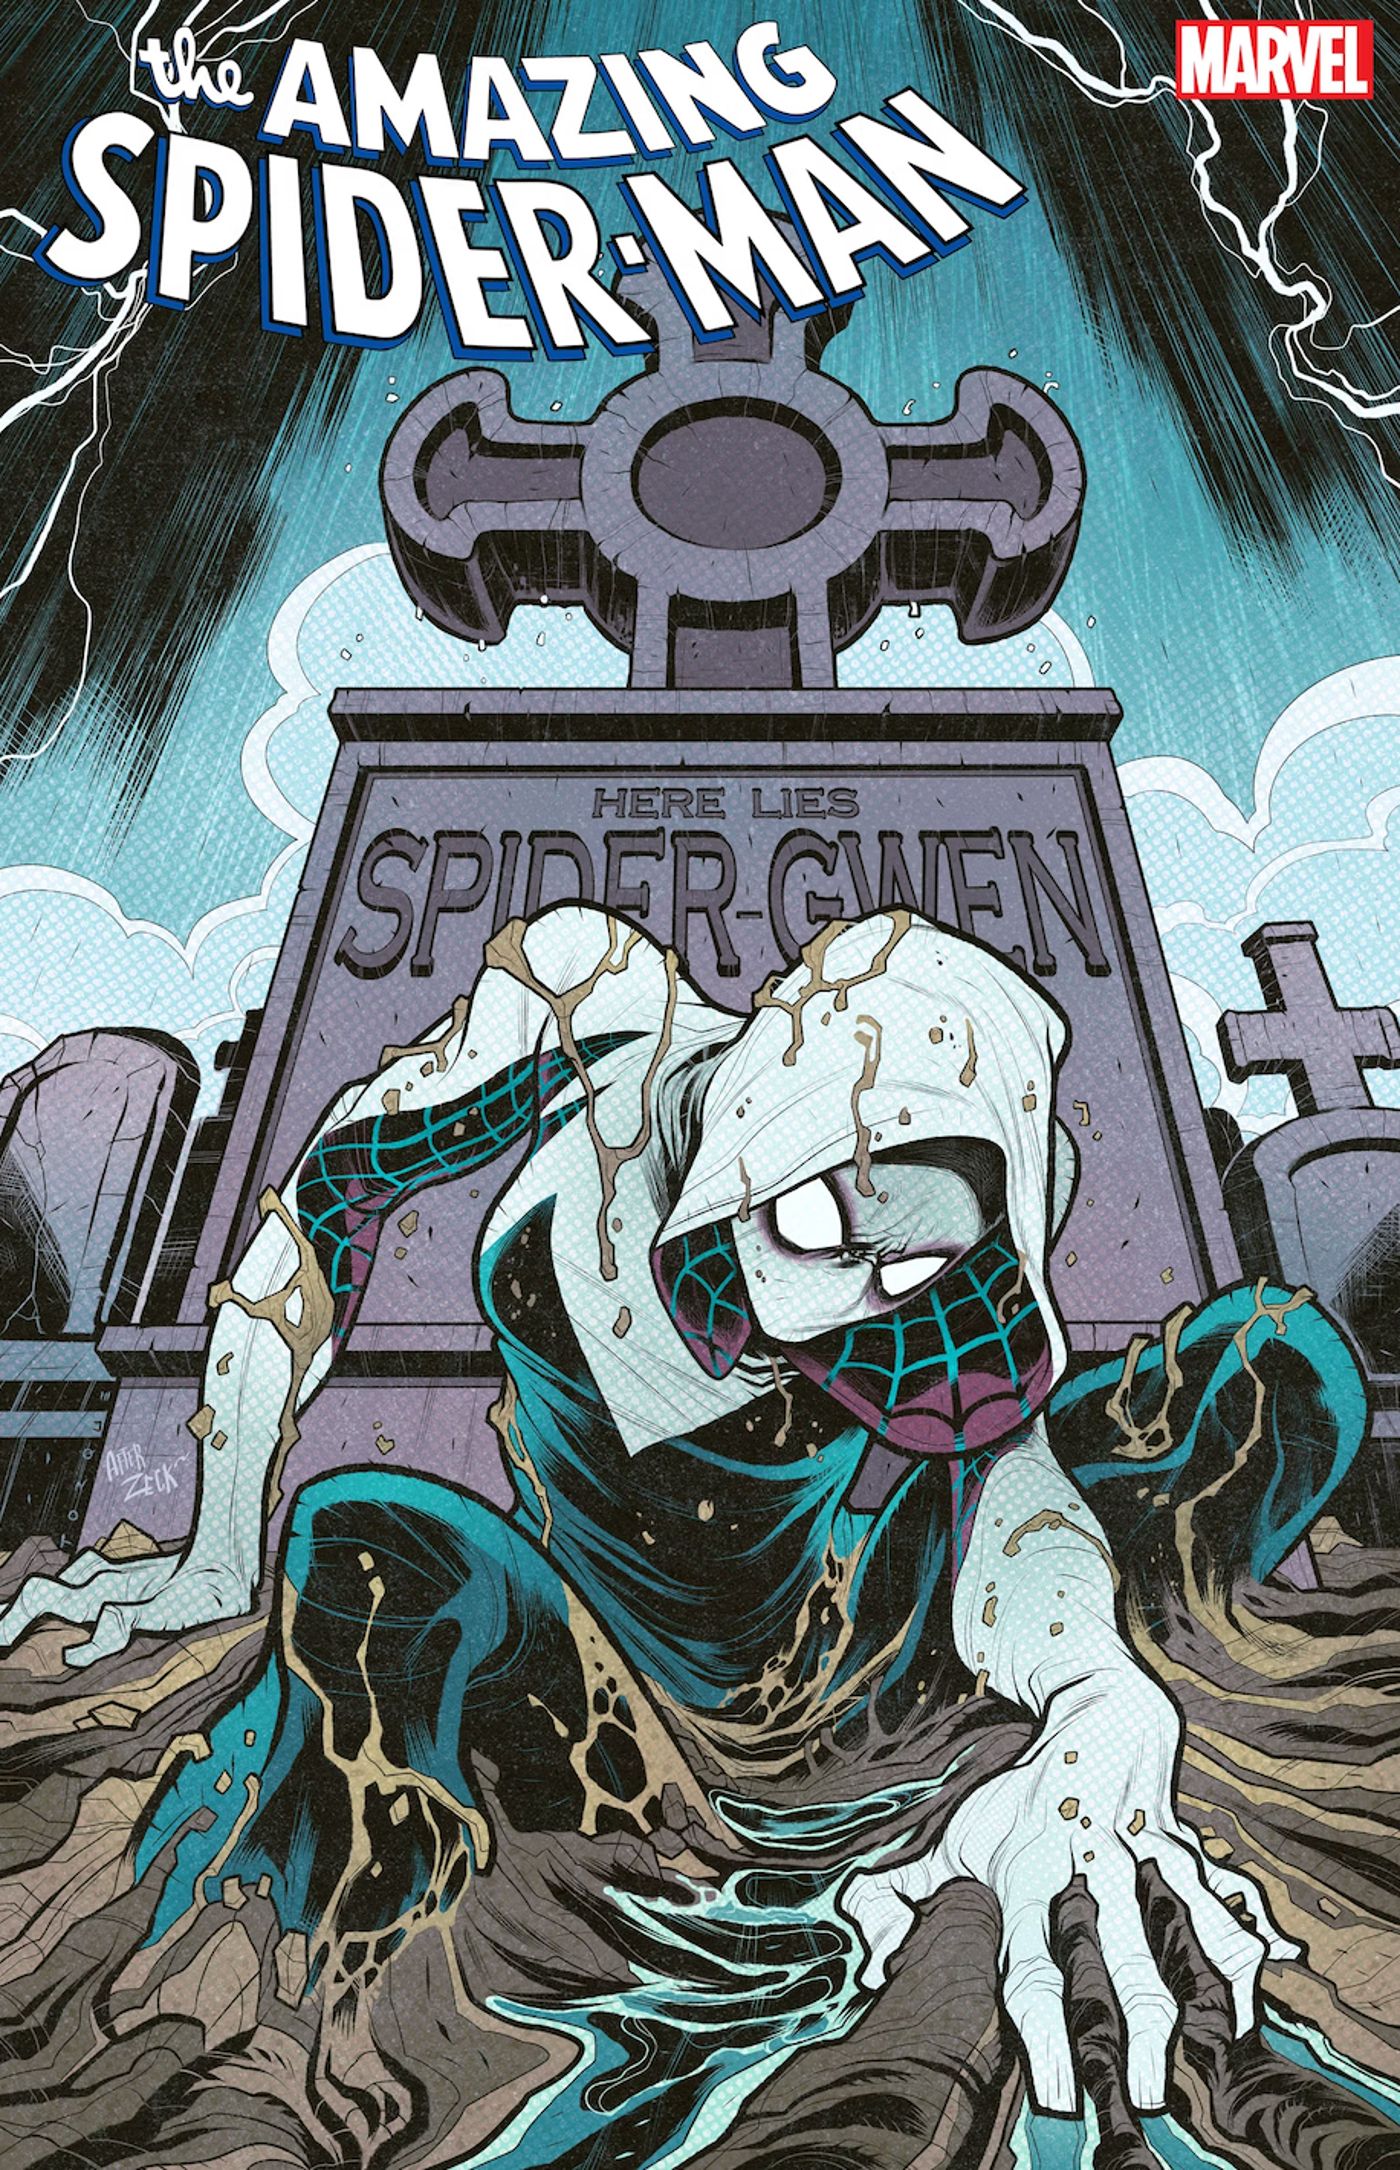 gwen stacy crawling out of her own grave in an homage to Kraven's Last Hunt